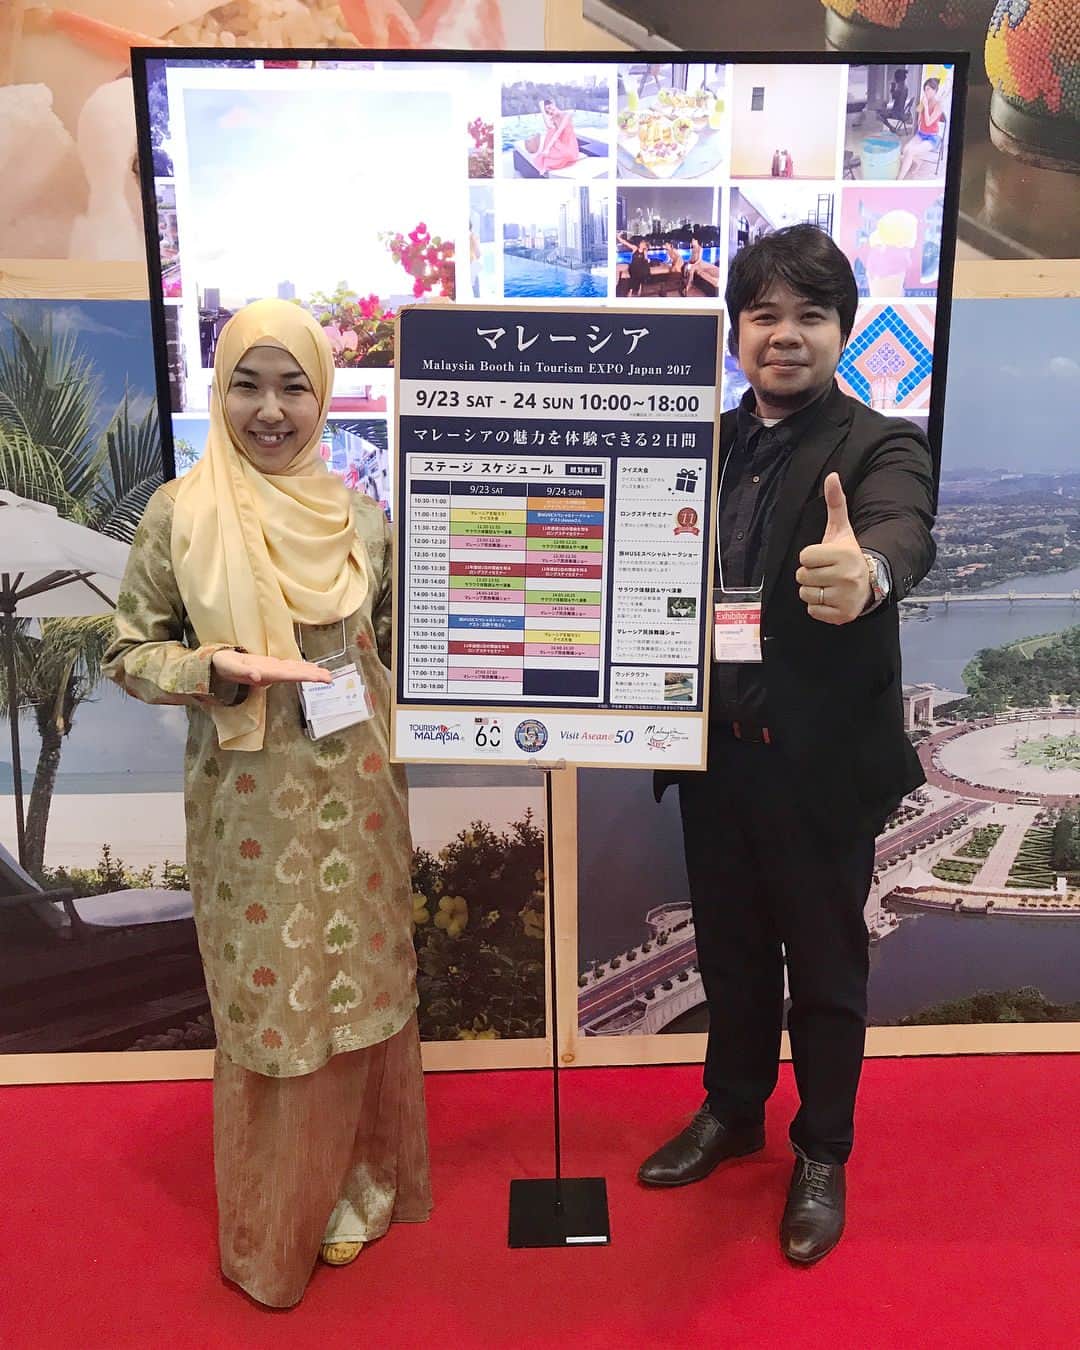 Risa Mizunoのインスタグラム：「My husband and I got a wonderful opportunity to promote Malaysia at the largest travel event, Tourism Expo Japan 2017 in Tokyo🗼✨ One of our big dream is to be a bridge between Japan and Malaysia and this exhibition was the milestone to move one step closer towards our dream. Alhamdulillah We are hoping more interactions between the two countries in many ways and we will contribute by our own uniqueness 😊 Special thanks to @tourismmalaysia_japanoffice for organising the event and for those visited Malaysia booth. Terima Kasih and see you next year, Inshallah!  #japanesemuslim #islam #muslim #muslimah #japanese #japan #tokyo #malaysia #muslimahtokyo #jepun #tourism #trip #travel #日本人ムスリム #日本 #東京 #イスラーム #マレーシア #国際結婚 #旅行 #旅 #ツーリズムexpoジャパン #tourismmalaysia #🇲🇾 #❤️ #🇯🇵」